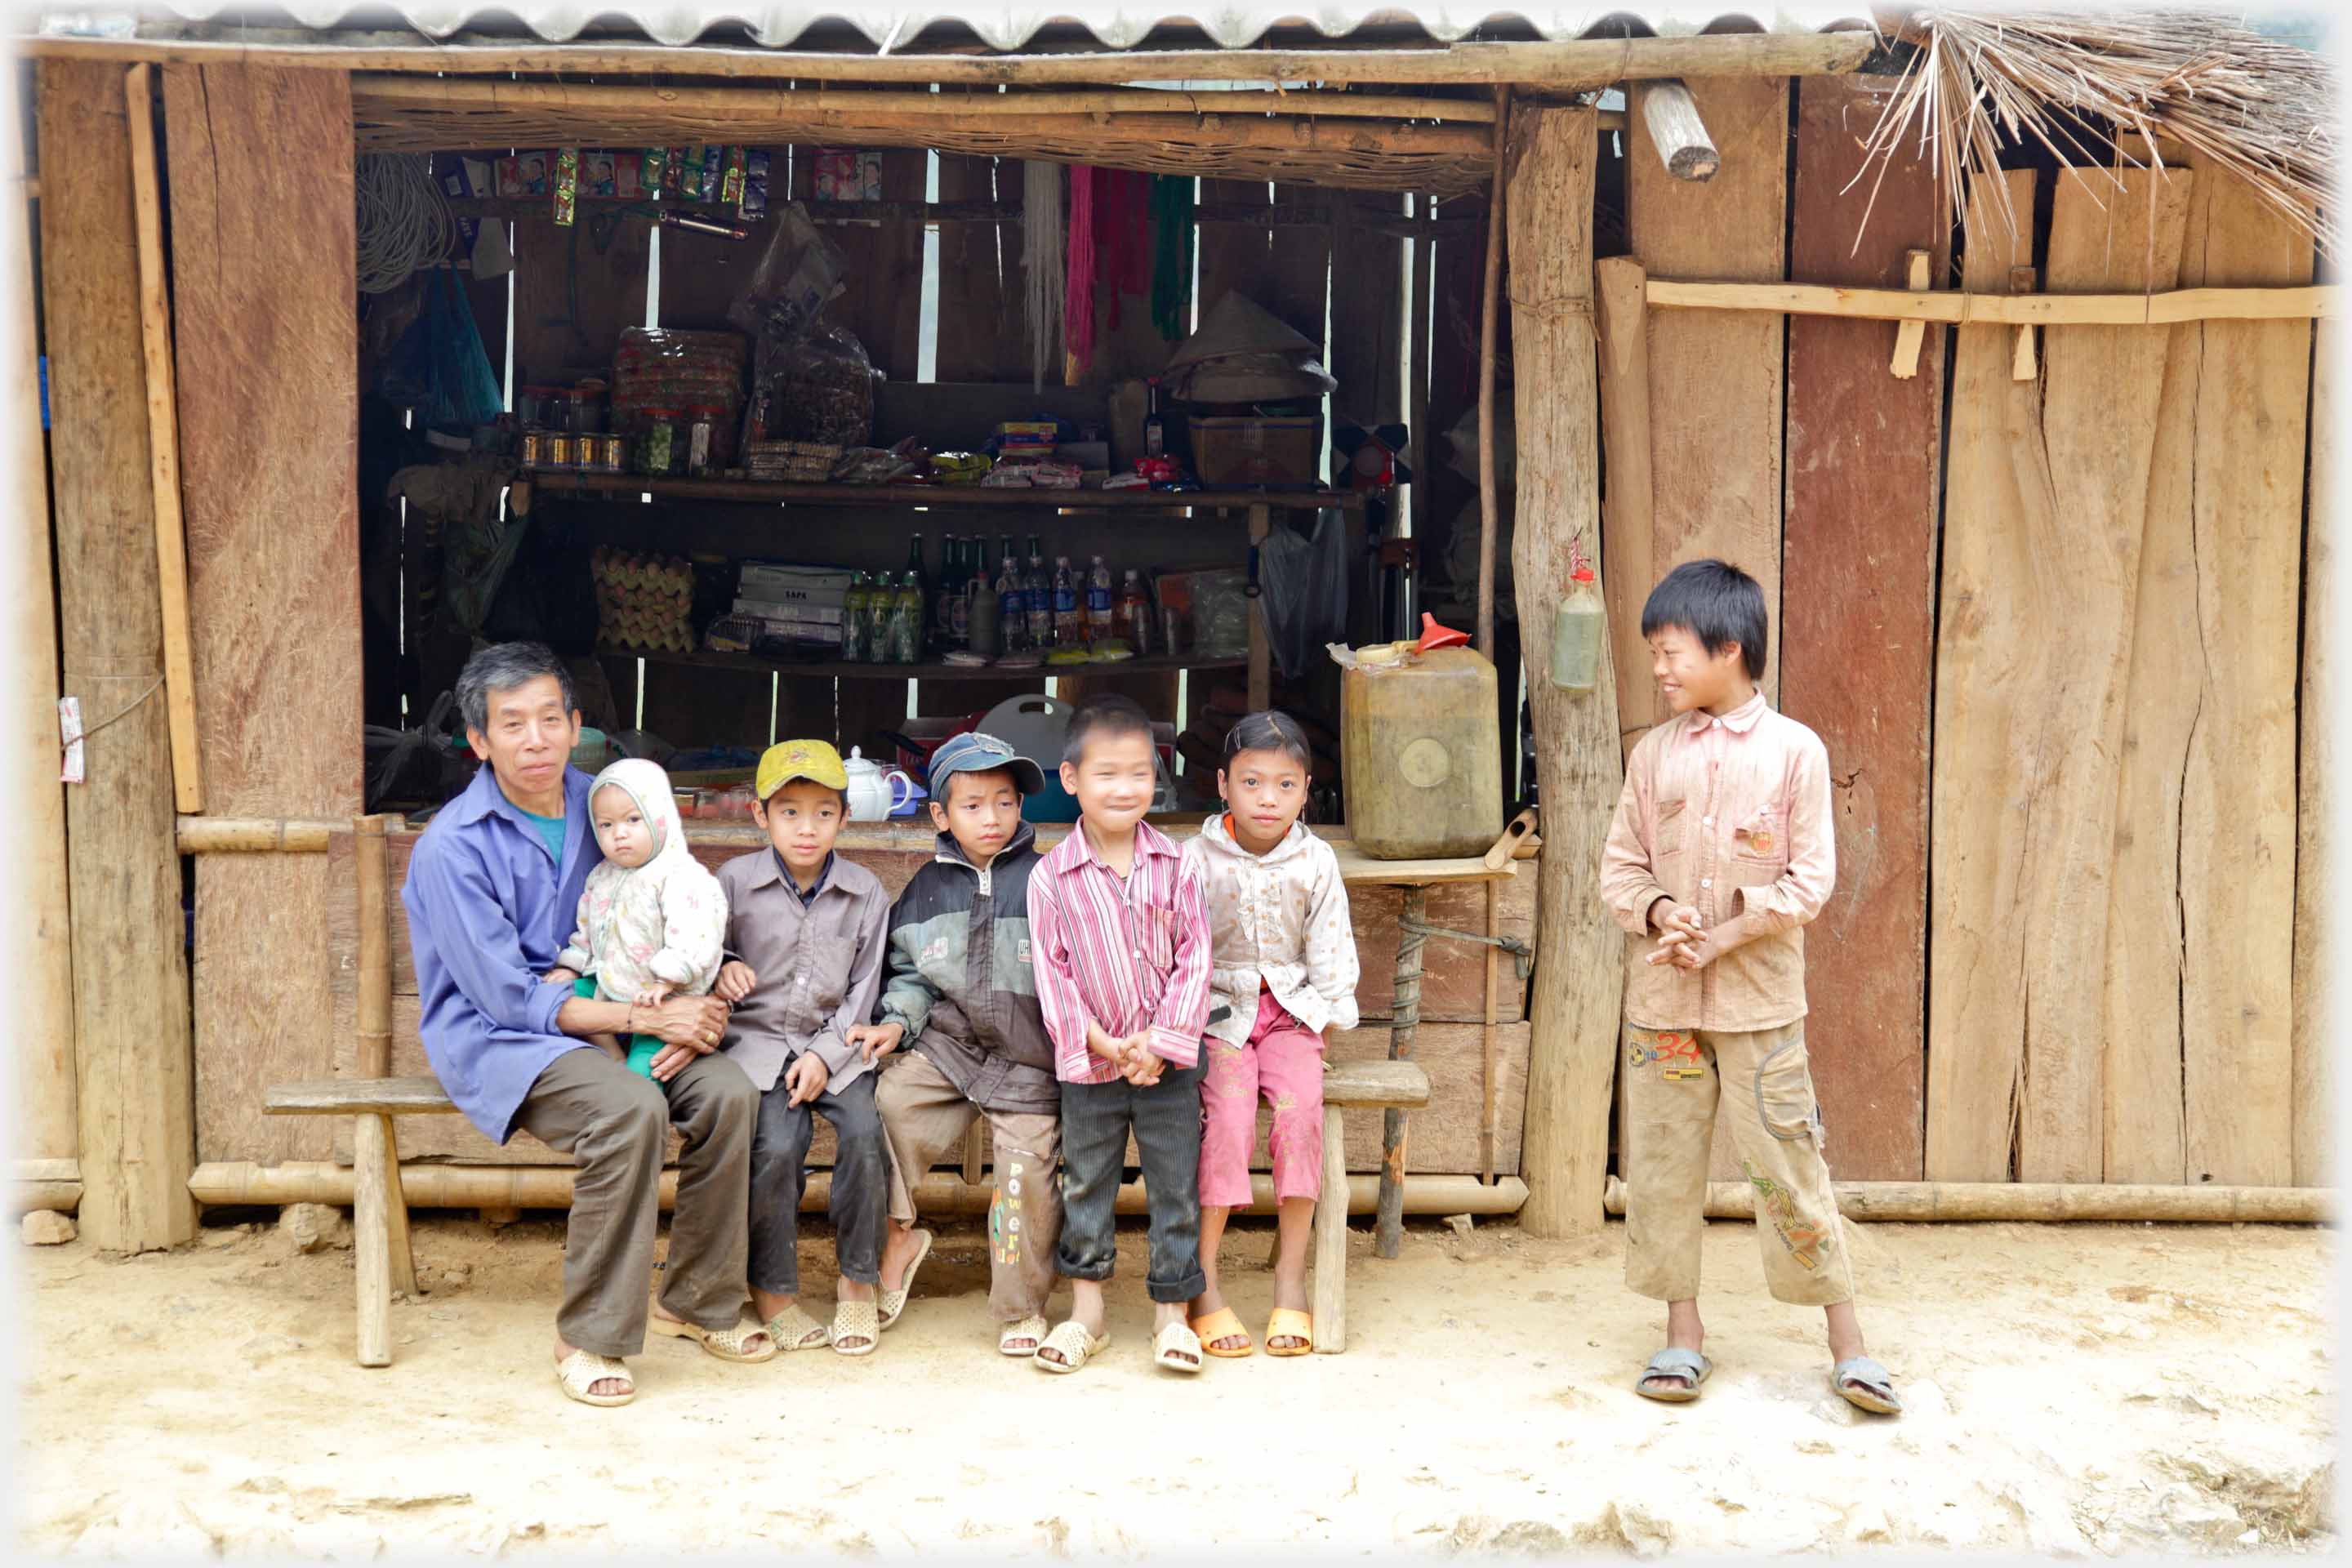 Bench under window of small shop on which a man and five children are sitting, and one older boy standing.